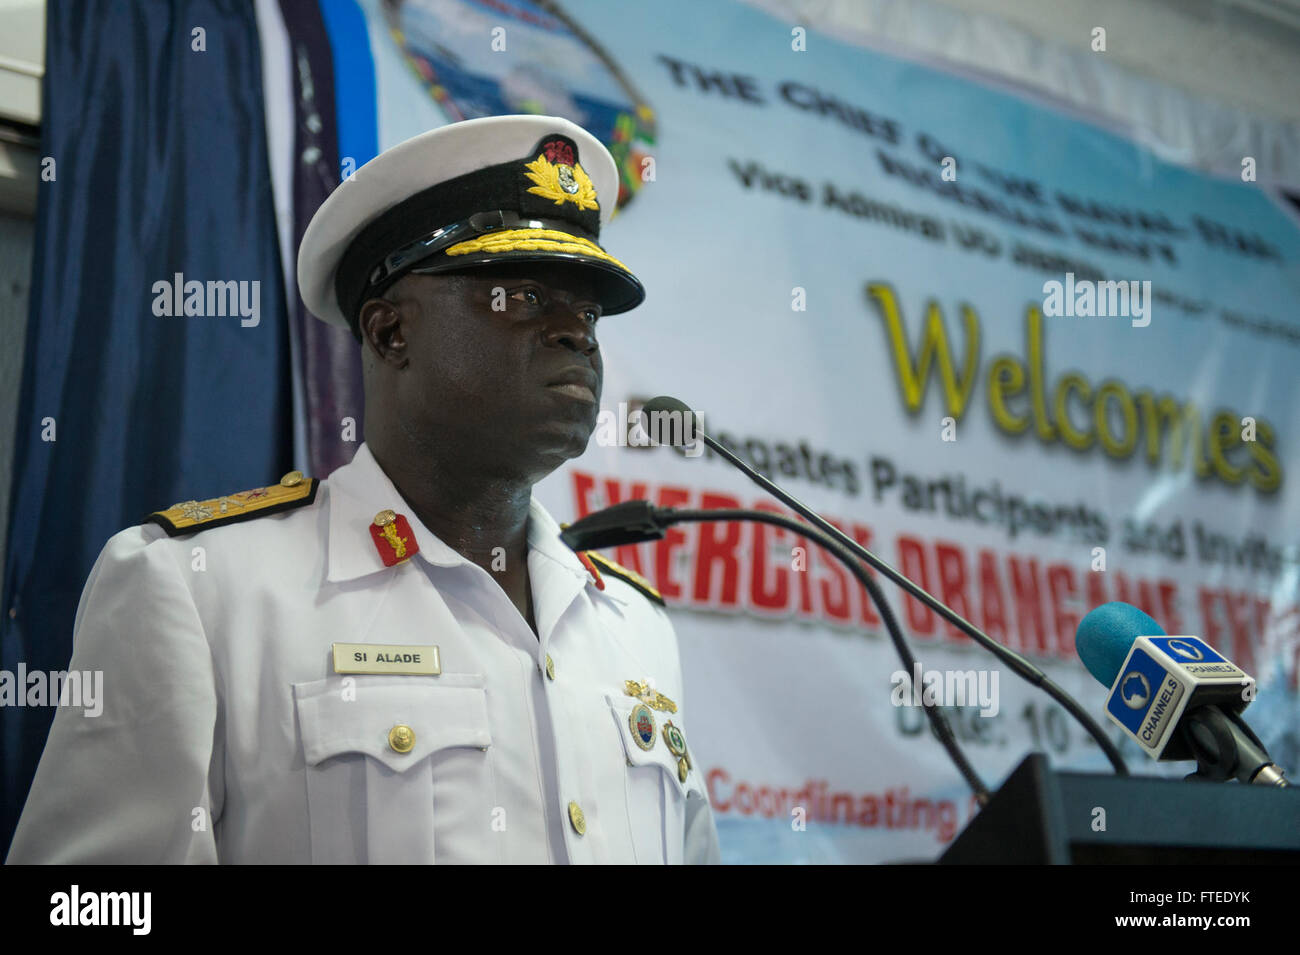 140423-N-IY142-099 LAGOS, Nigeria (April 23, 2014) - Rear Adm. S. I. Alade, flag officer commanding Nigerian navy Western Naval Command, delivers remarks during the closing ceremony of Obangame Express 2014. Obangame Express is a U.S. Africa Command-sponsored multinational maritime exercise designed to increase maritime safety and security in the Gulf of Guinea. (U.S. Navy photo by Mass Communication Specialist 2nd Class John Herman/Released) Stock Photo